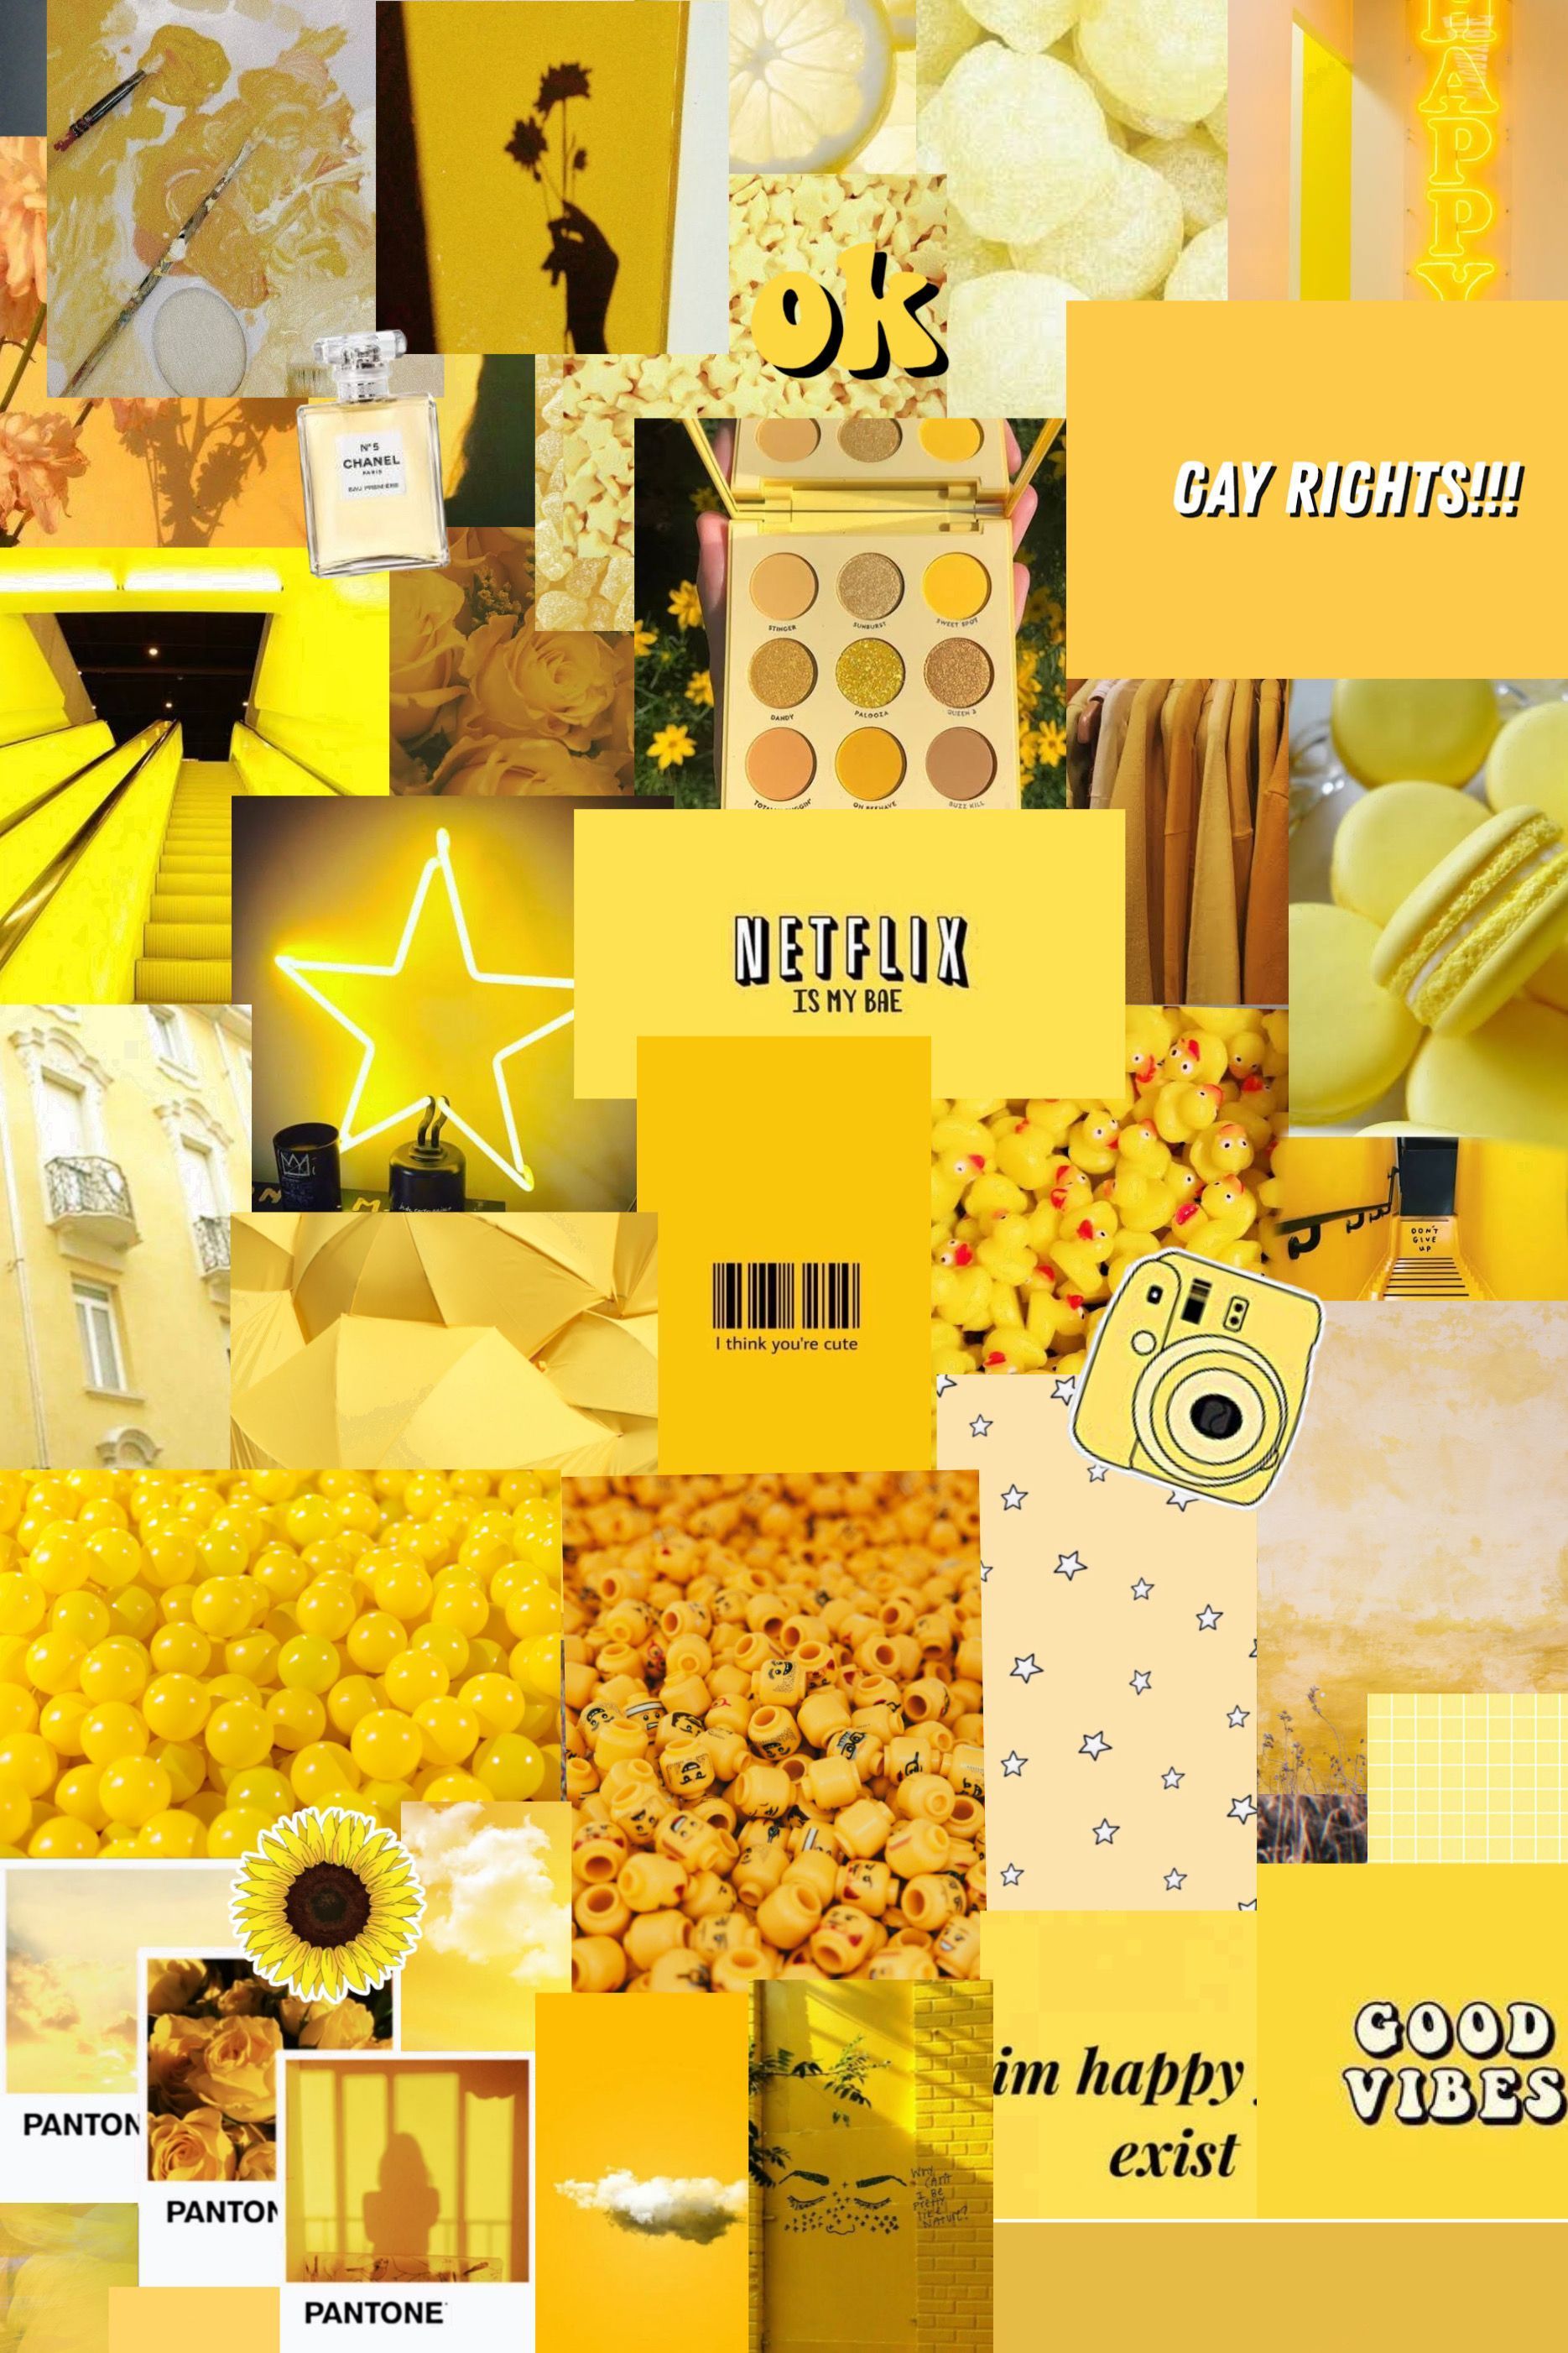 A collage of yellow pictures and text - Pastel yellow, yellow